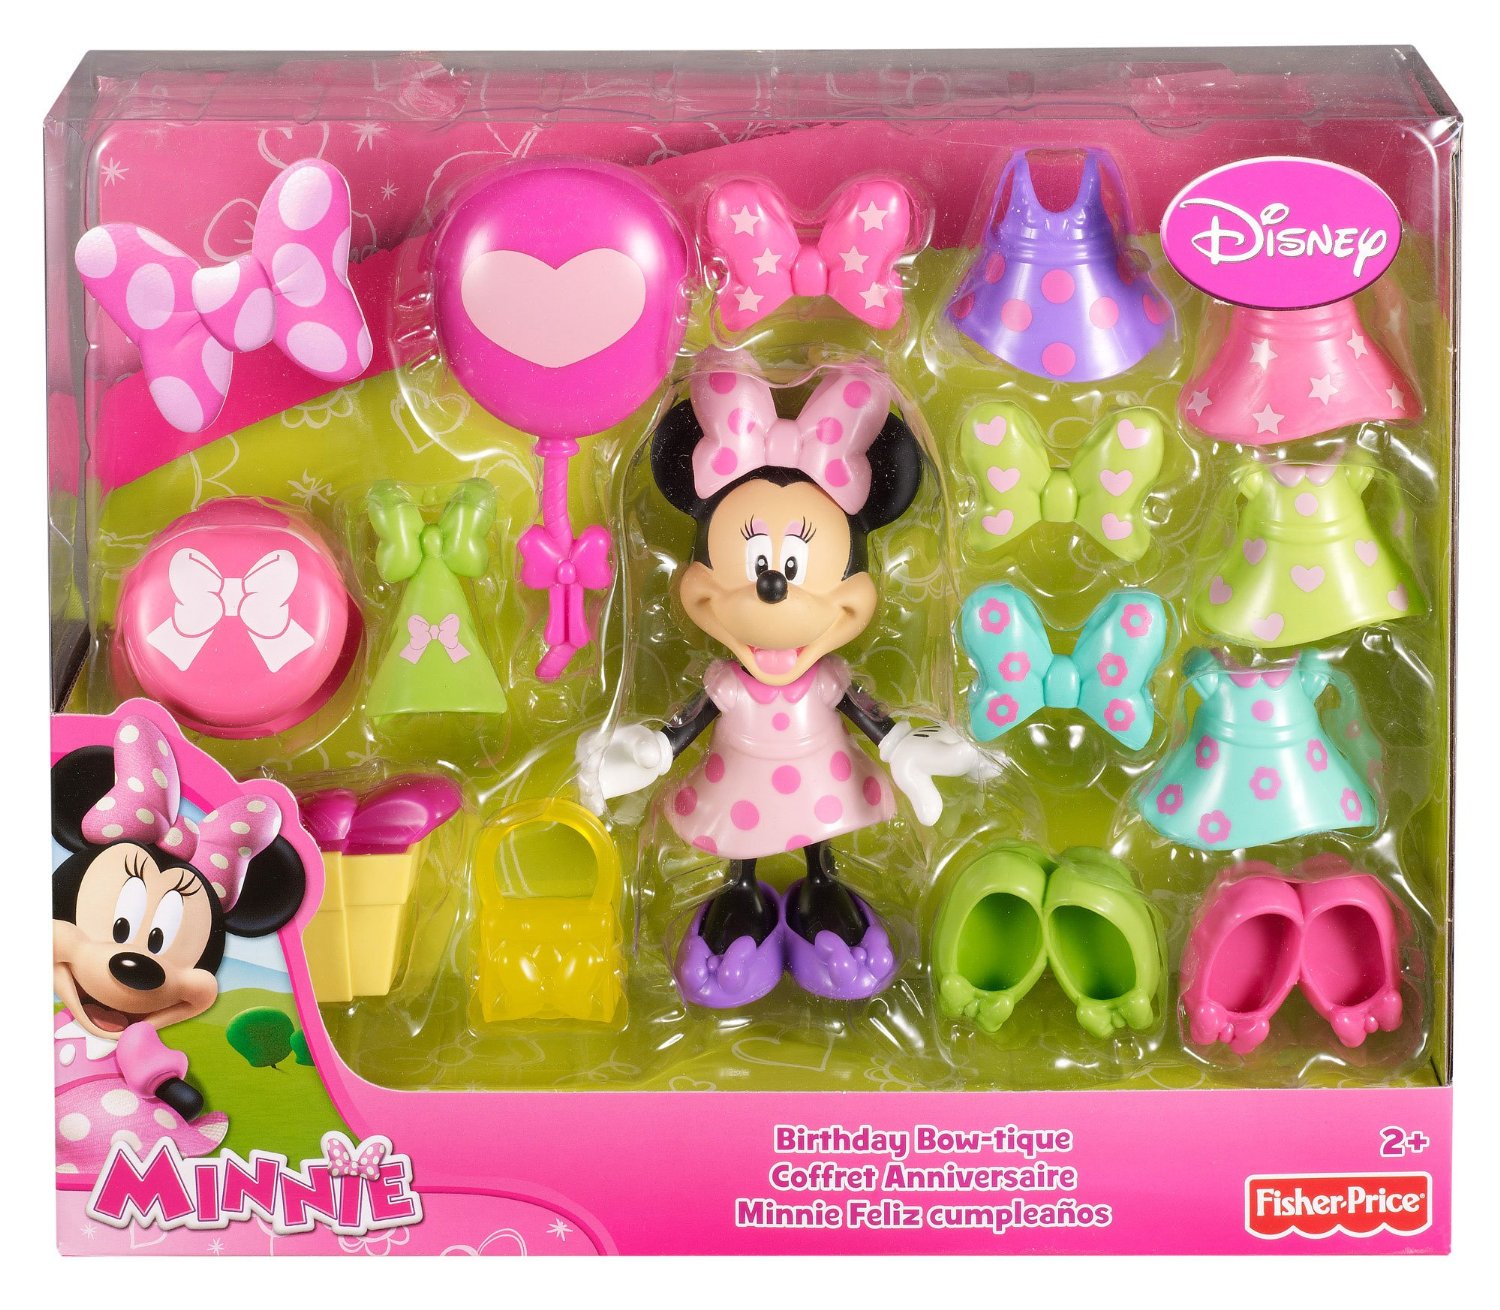 Fisher-Price Disney’s Minnie Mouse Birthday Bowtique Only $11.99